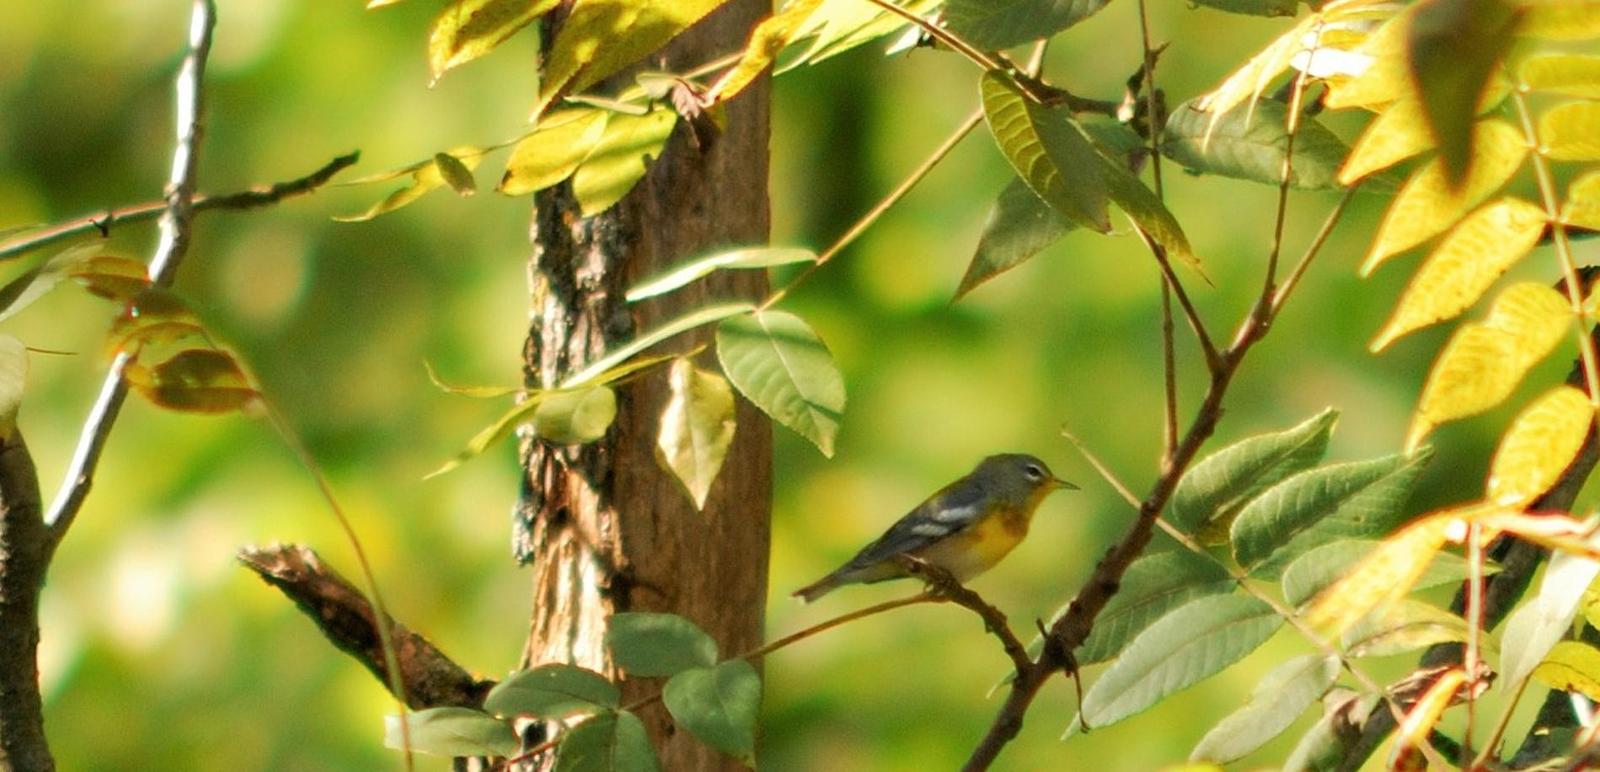 Northern Parula Photo by RM Beck